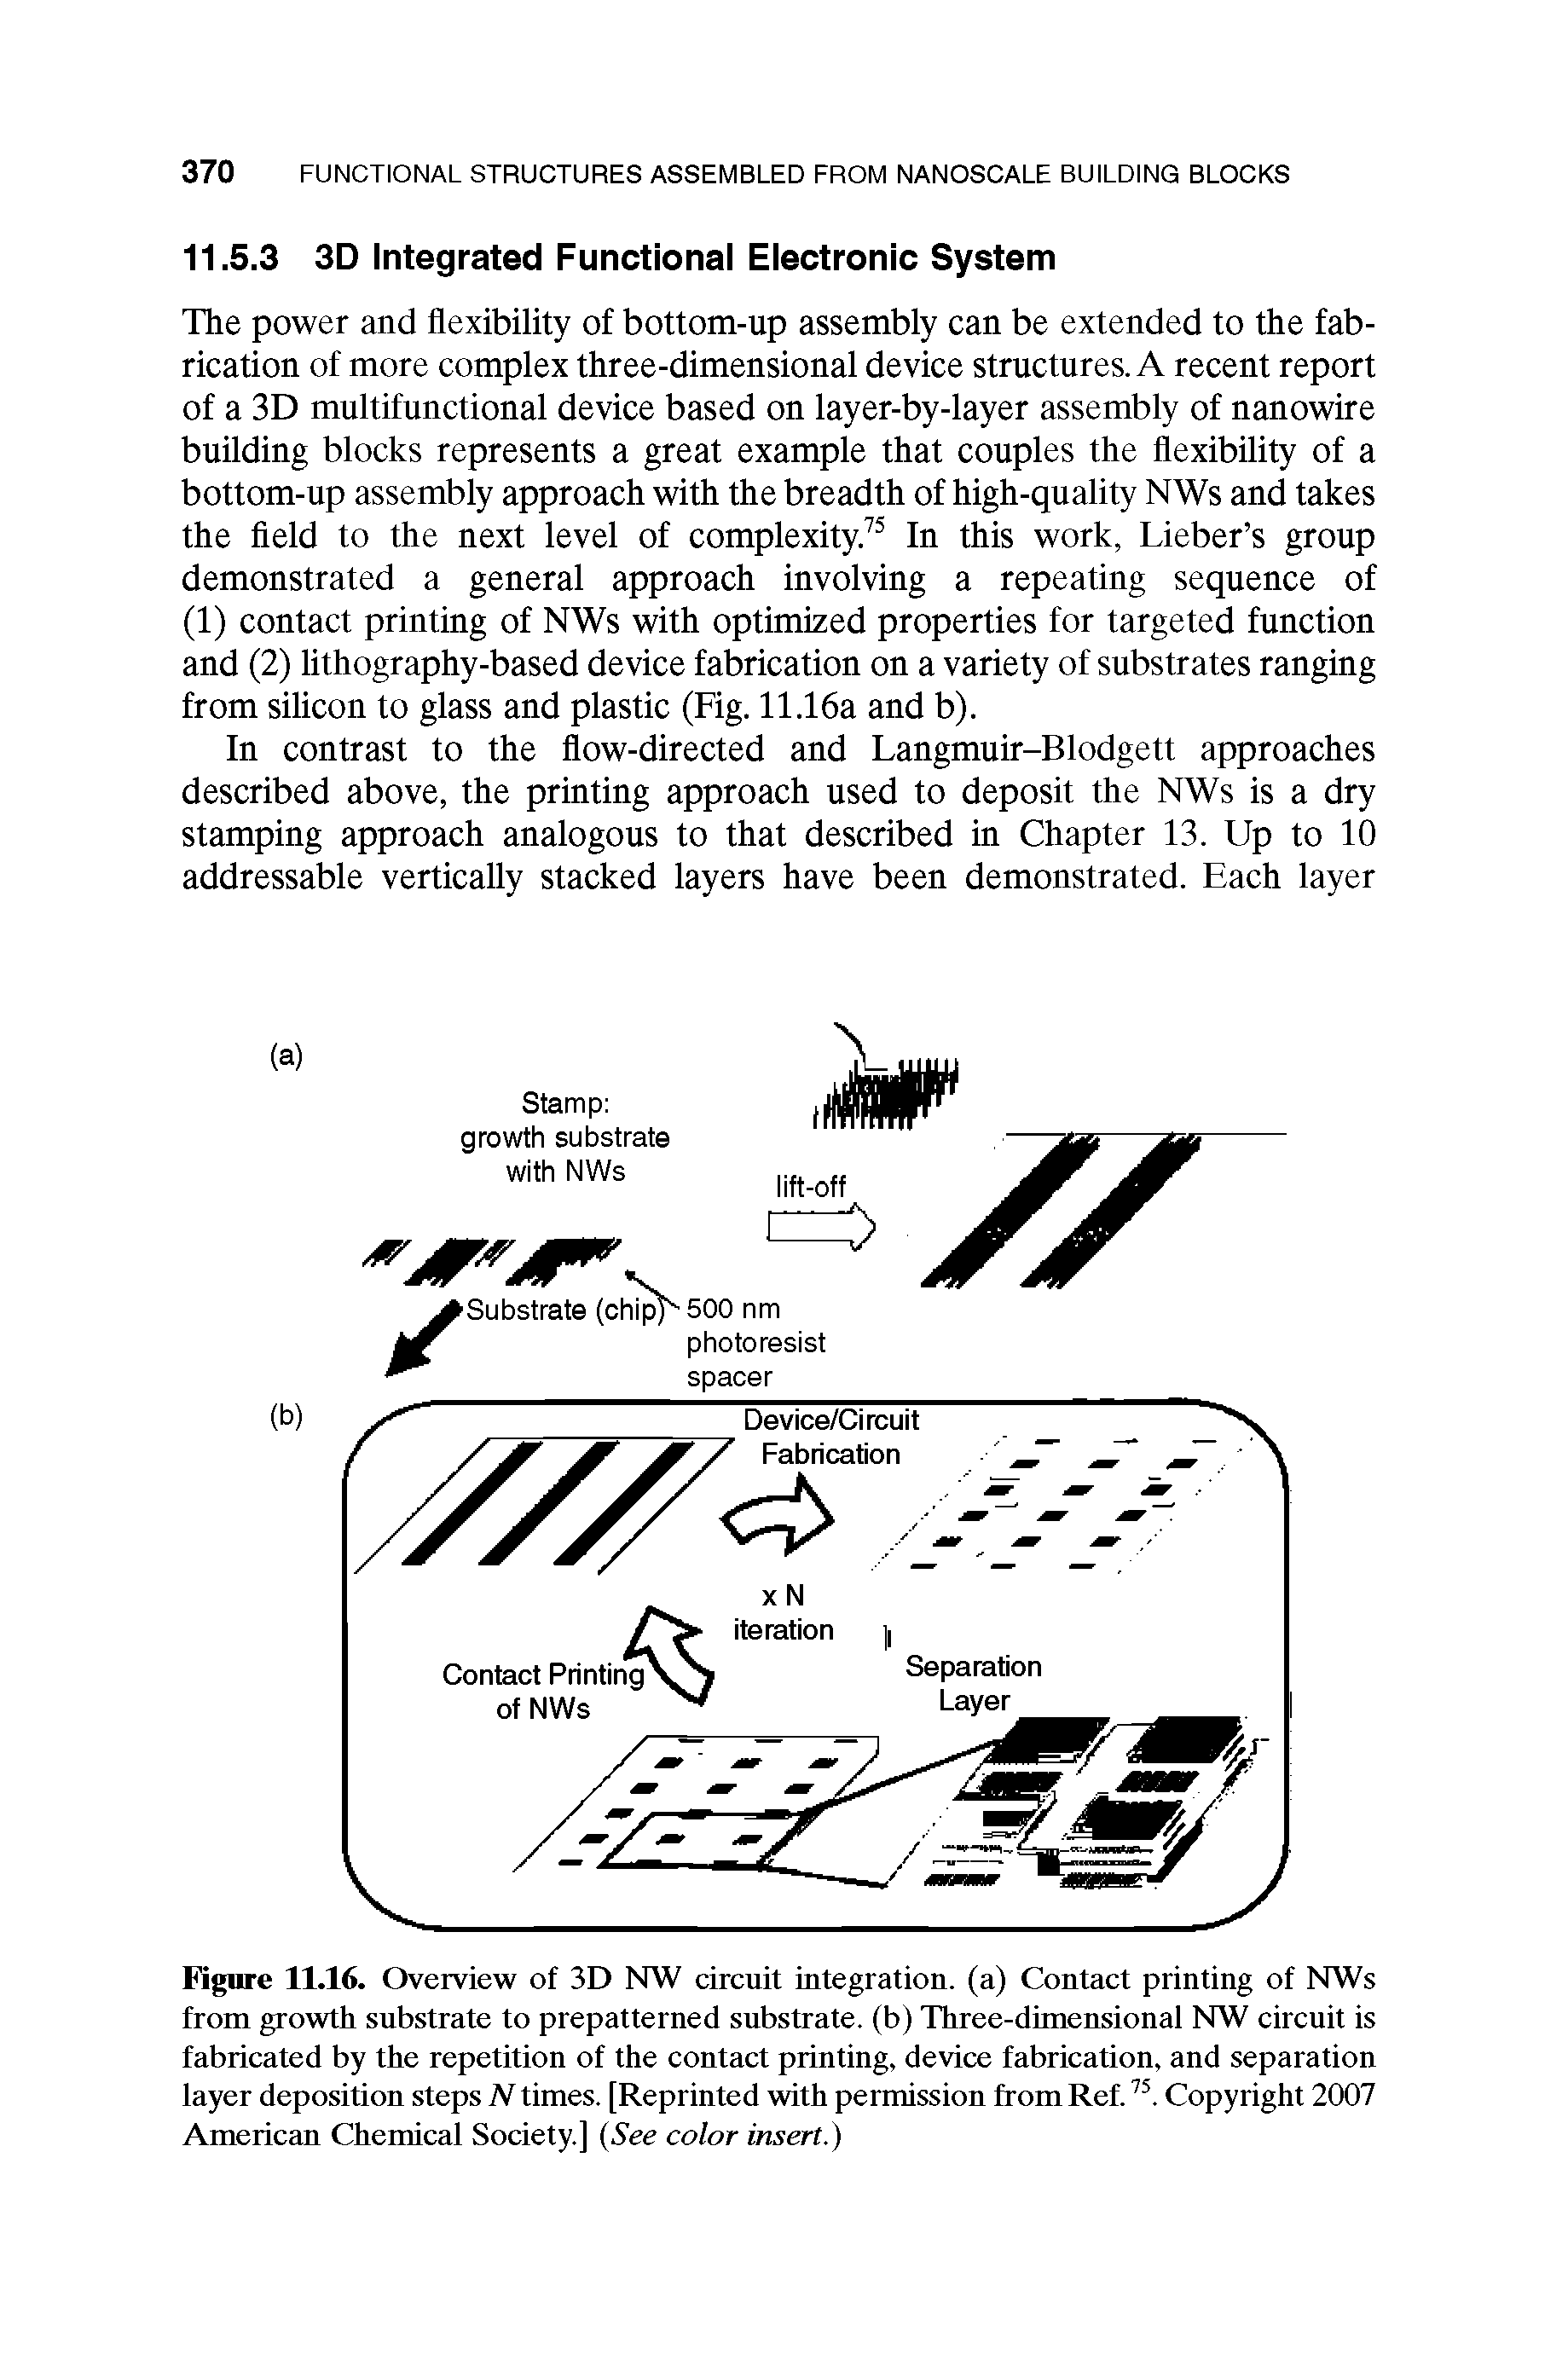 Figure 11.16. Overview of 3D NW circuit integration, (a) Contact printing of NWs from growth substrate to prepatterned substrate, (b) Three-dimensional NW circuit is fabricated by the repetition of the contact printing, device fabrication, and separation layer deposition steps N times. [Reprinted with permission from Ref.75. Copyright 2007 American Chemical Society.] (See color insert.)...